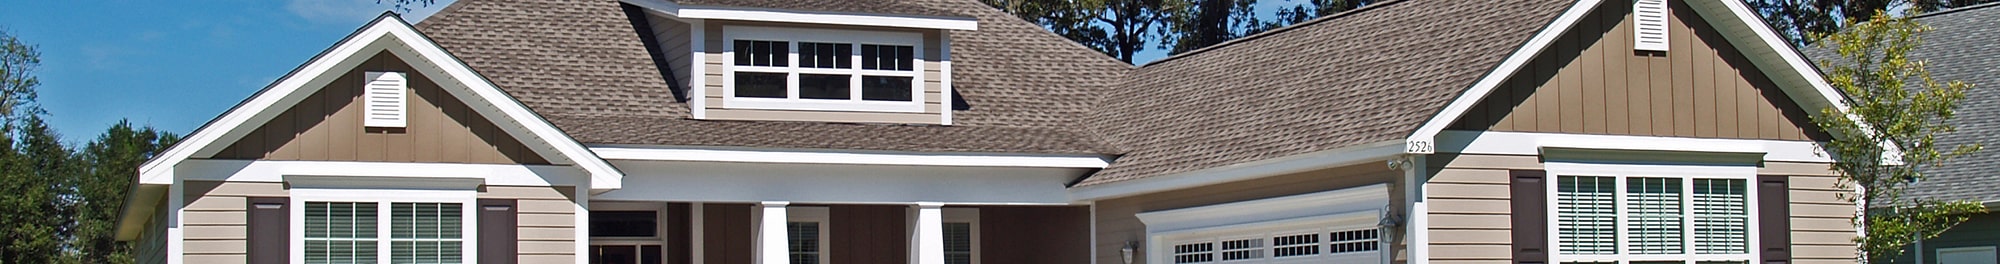 Contact Vesel Services for free project quote on roofing & HVAC today